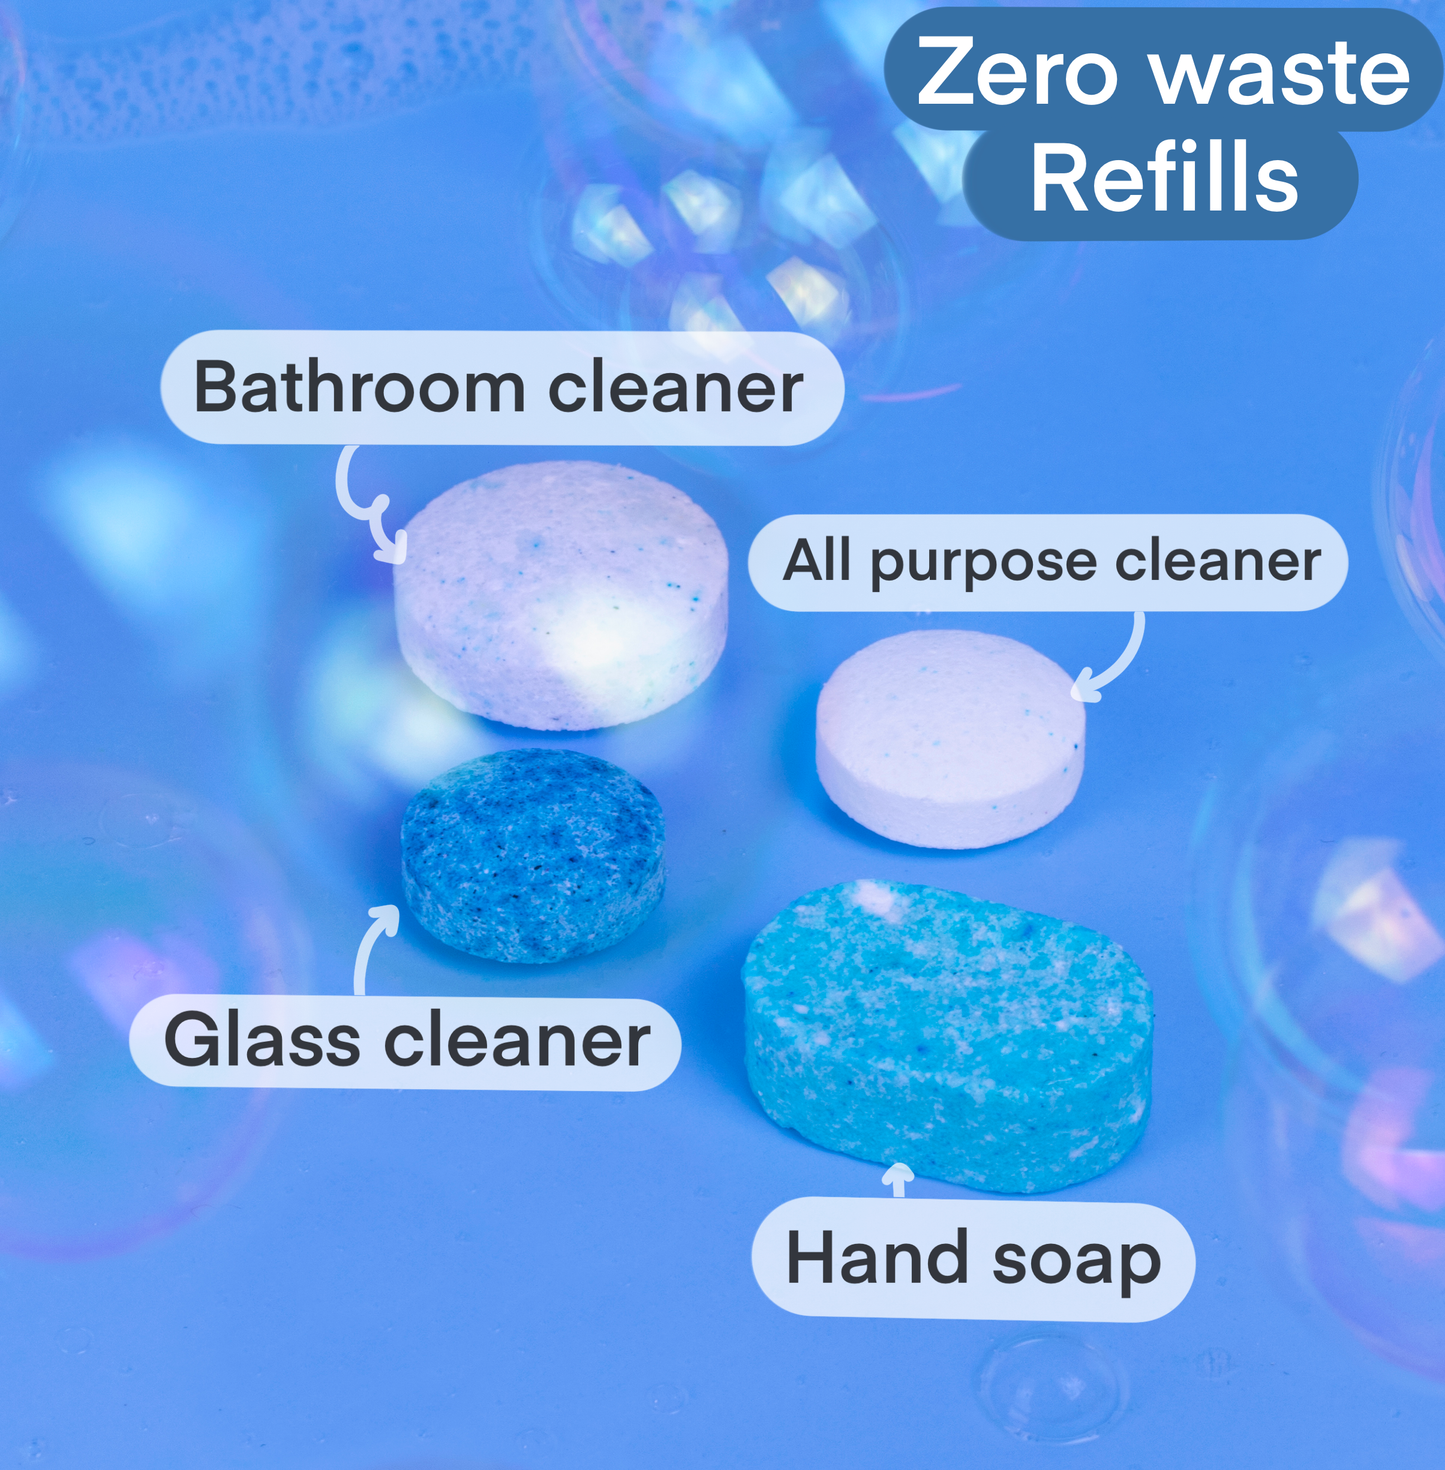 0wastecleaning Refill tablets starter kit zero waste-sustainable-refill tablet  magasin zero dechet a Montreal vegan cleaner-pet friendly cleaner